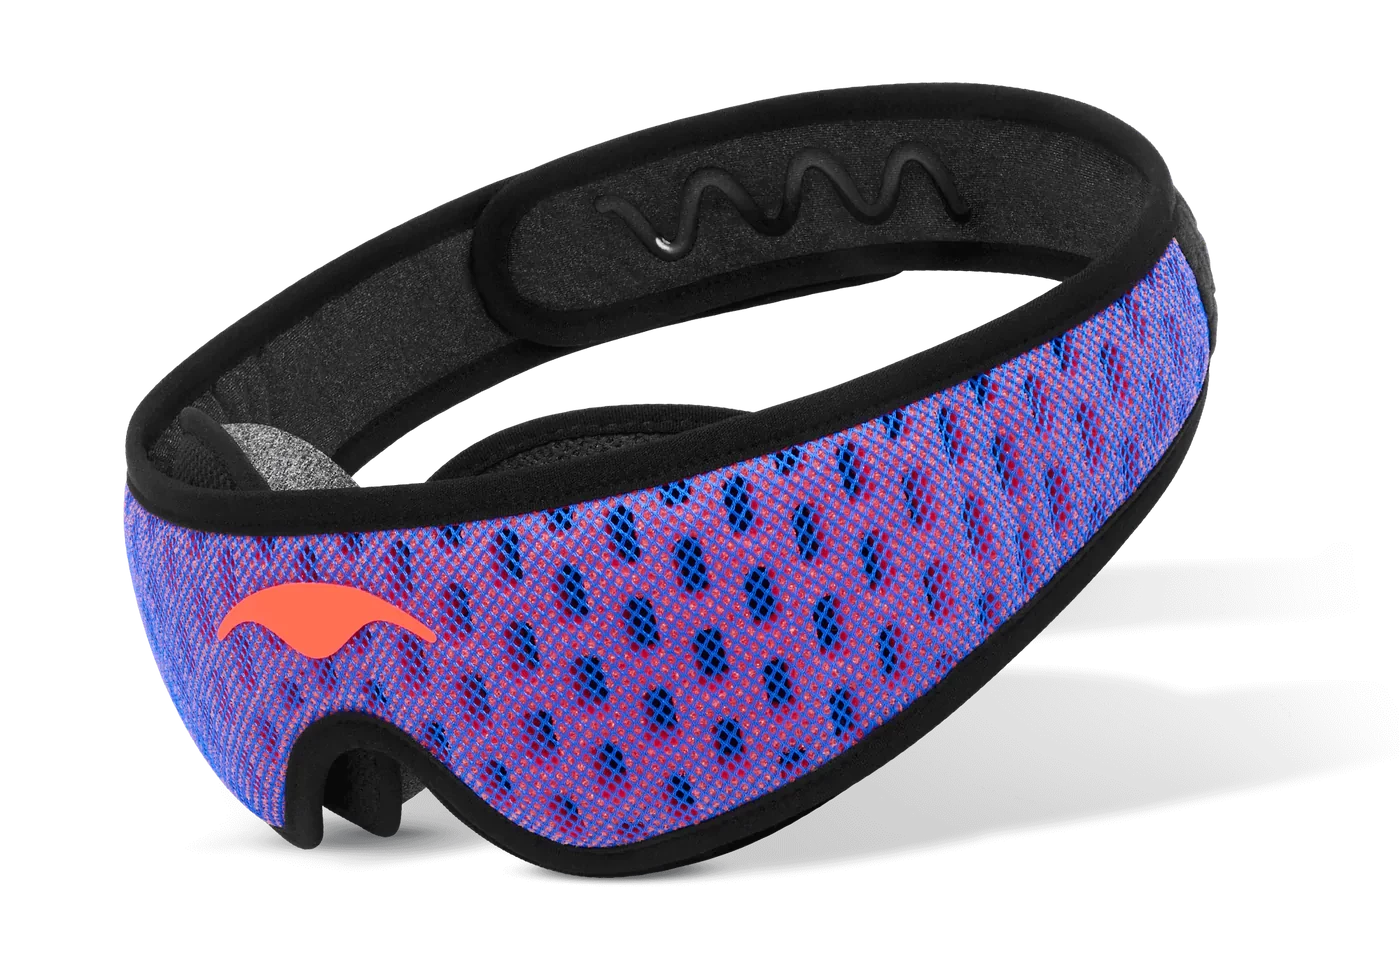 A blue mesh eye mask with eye cups for side sleepers.